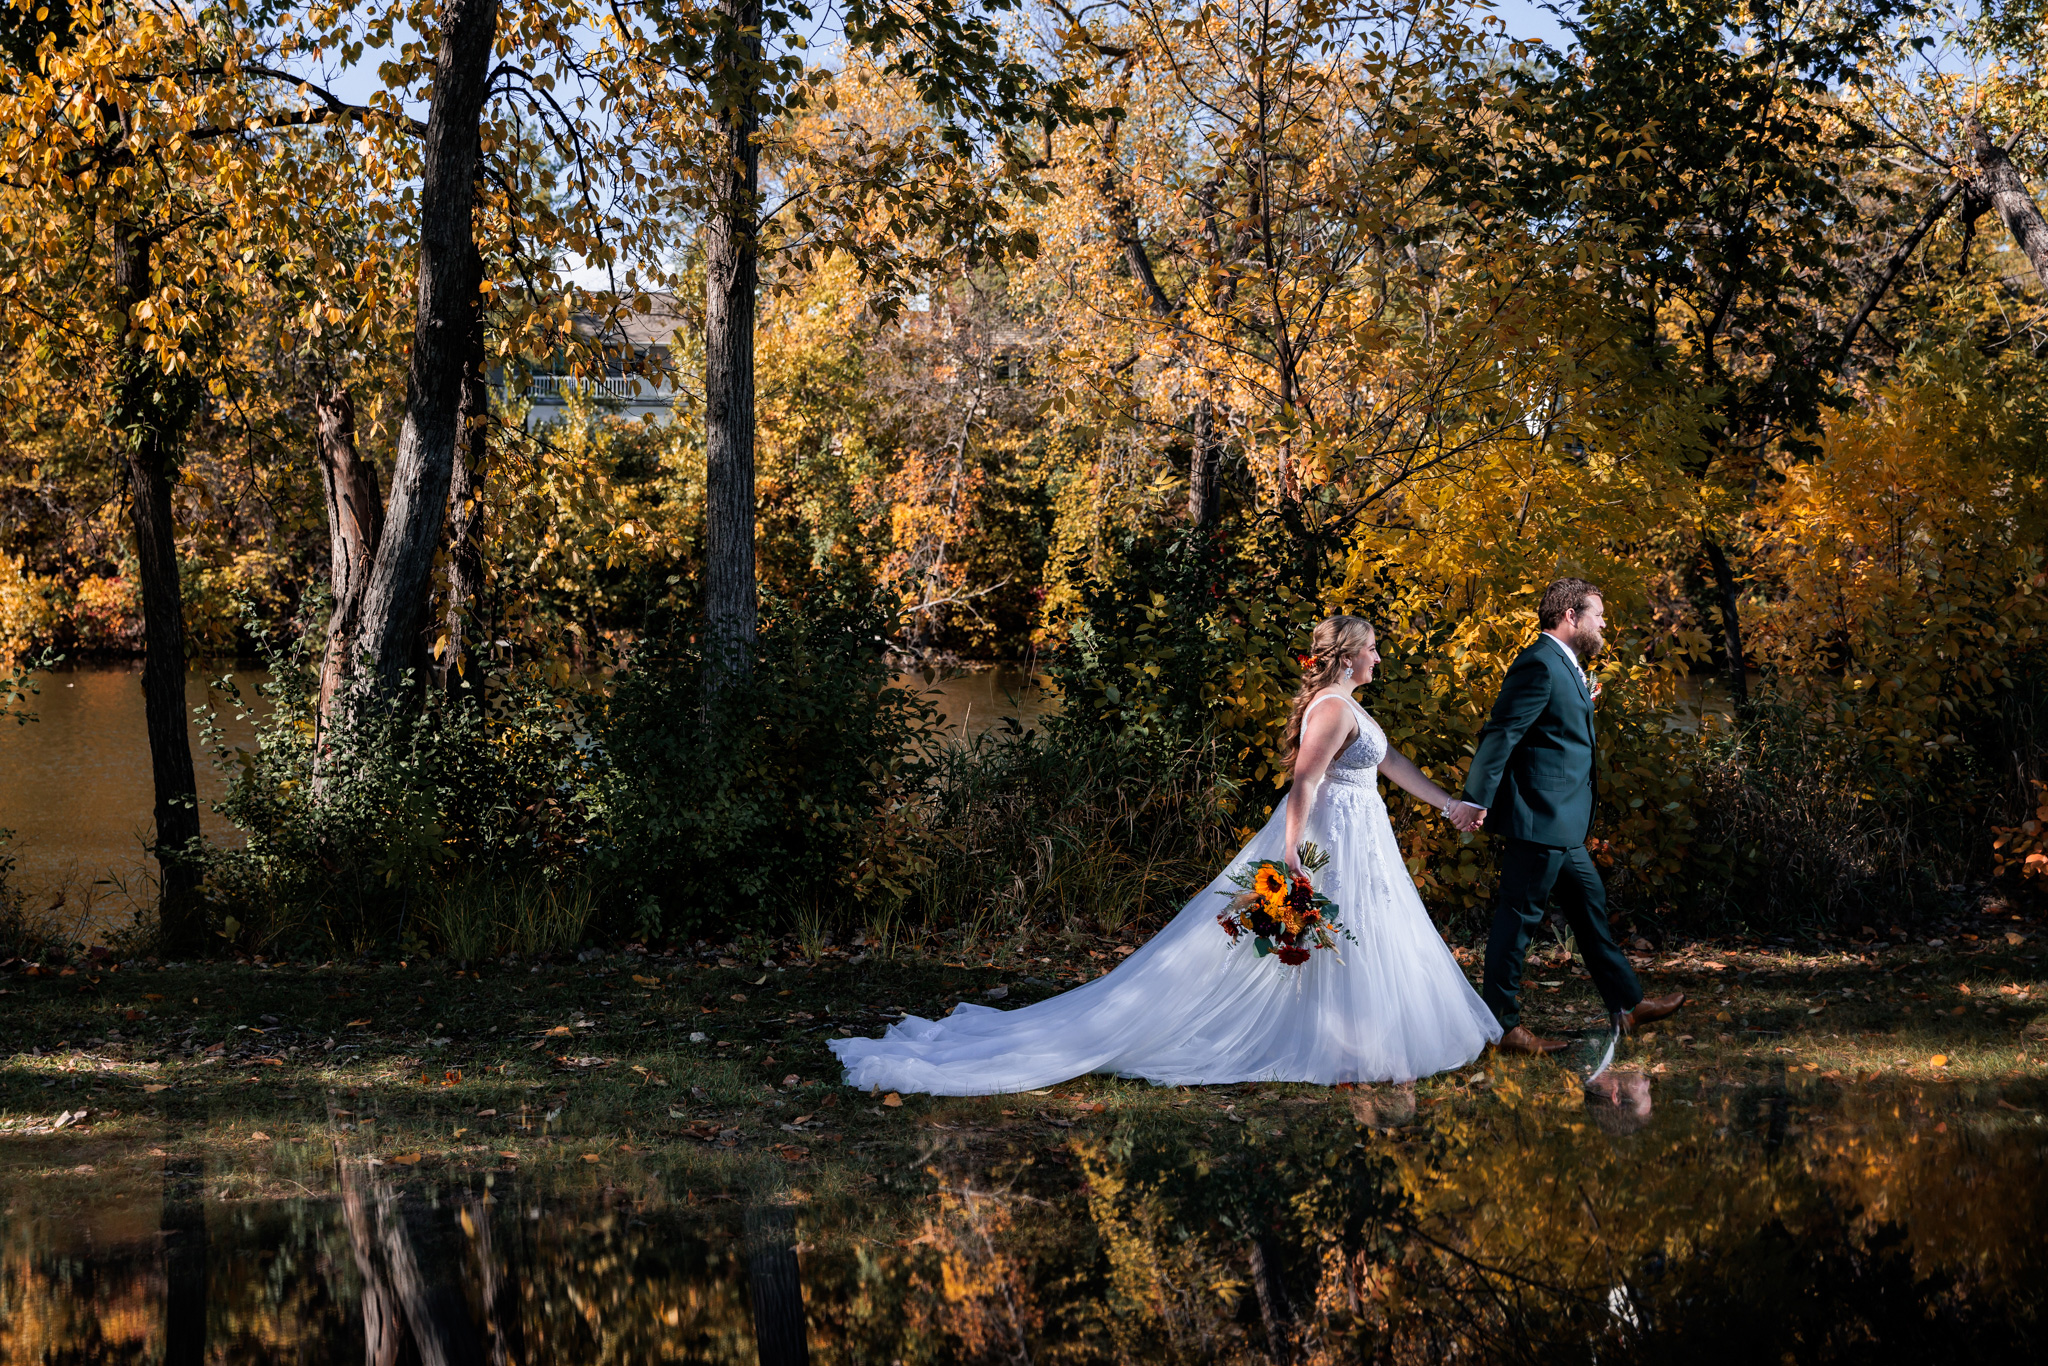 The Mill Site wedding